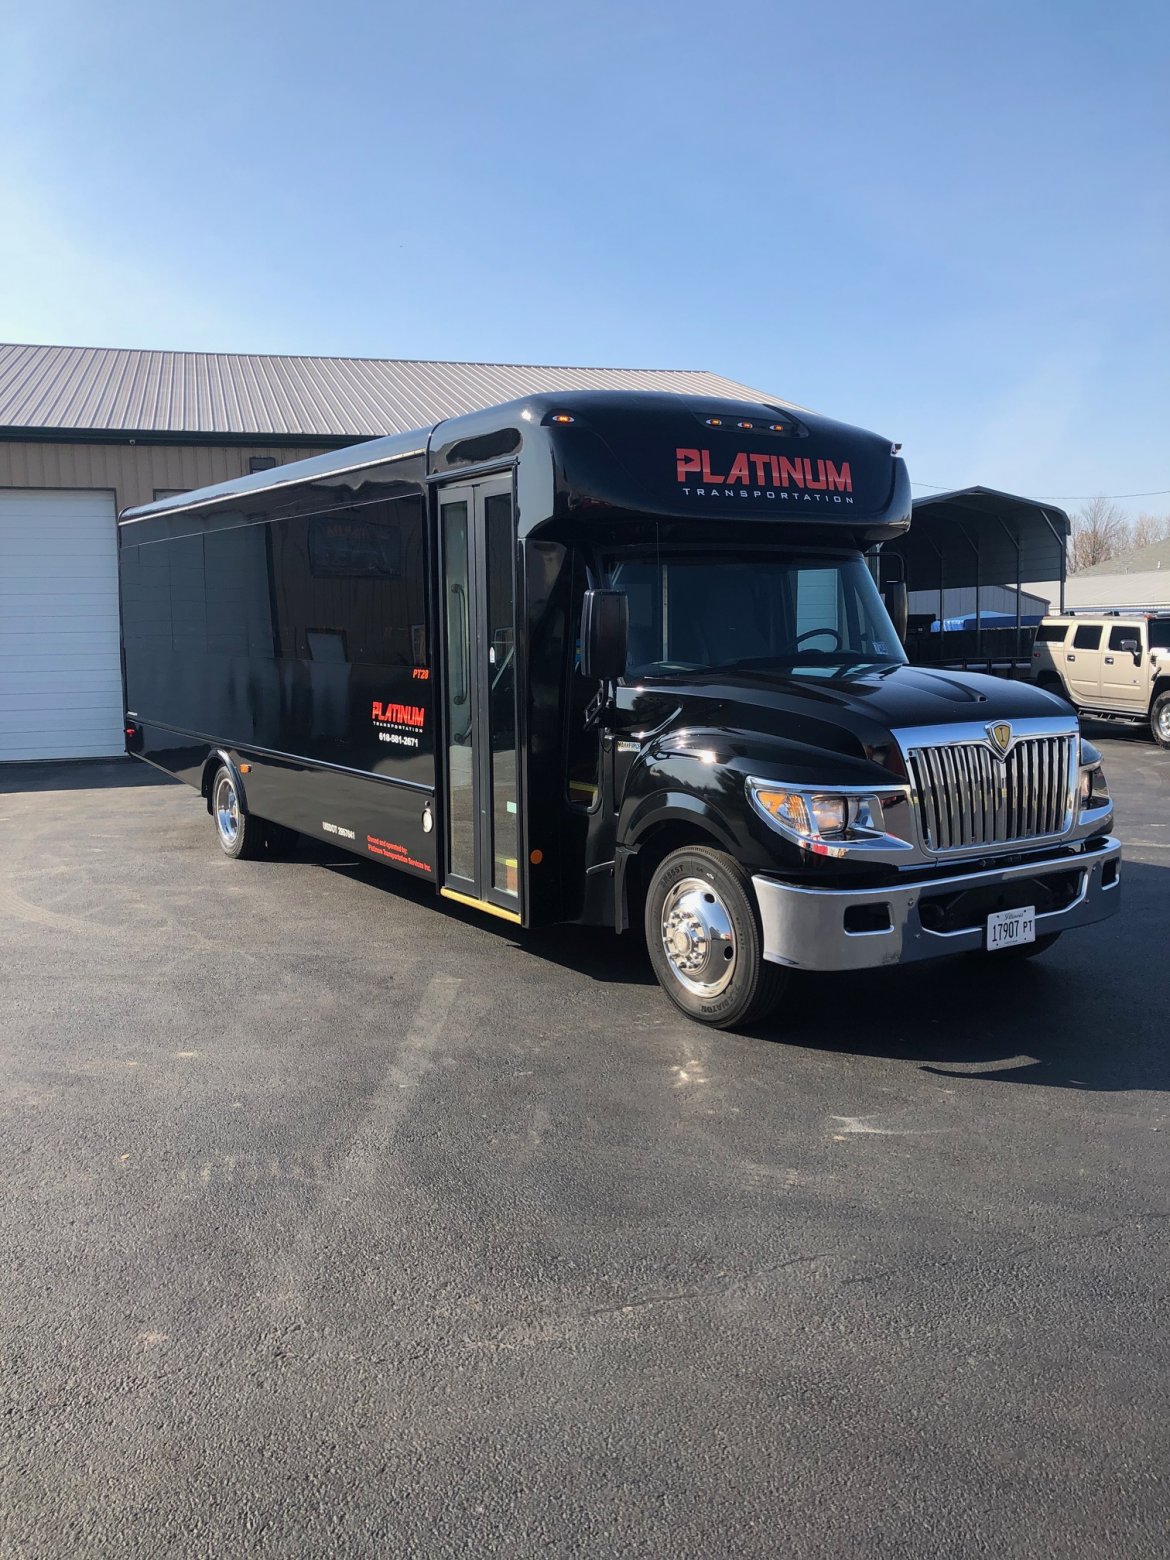 Limo Bus for sale: 2014 IC Bus 28 Passenger Limo Bus by Battisti Customs